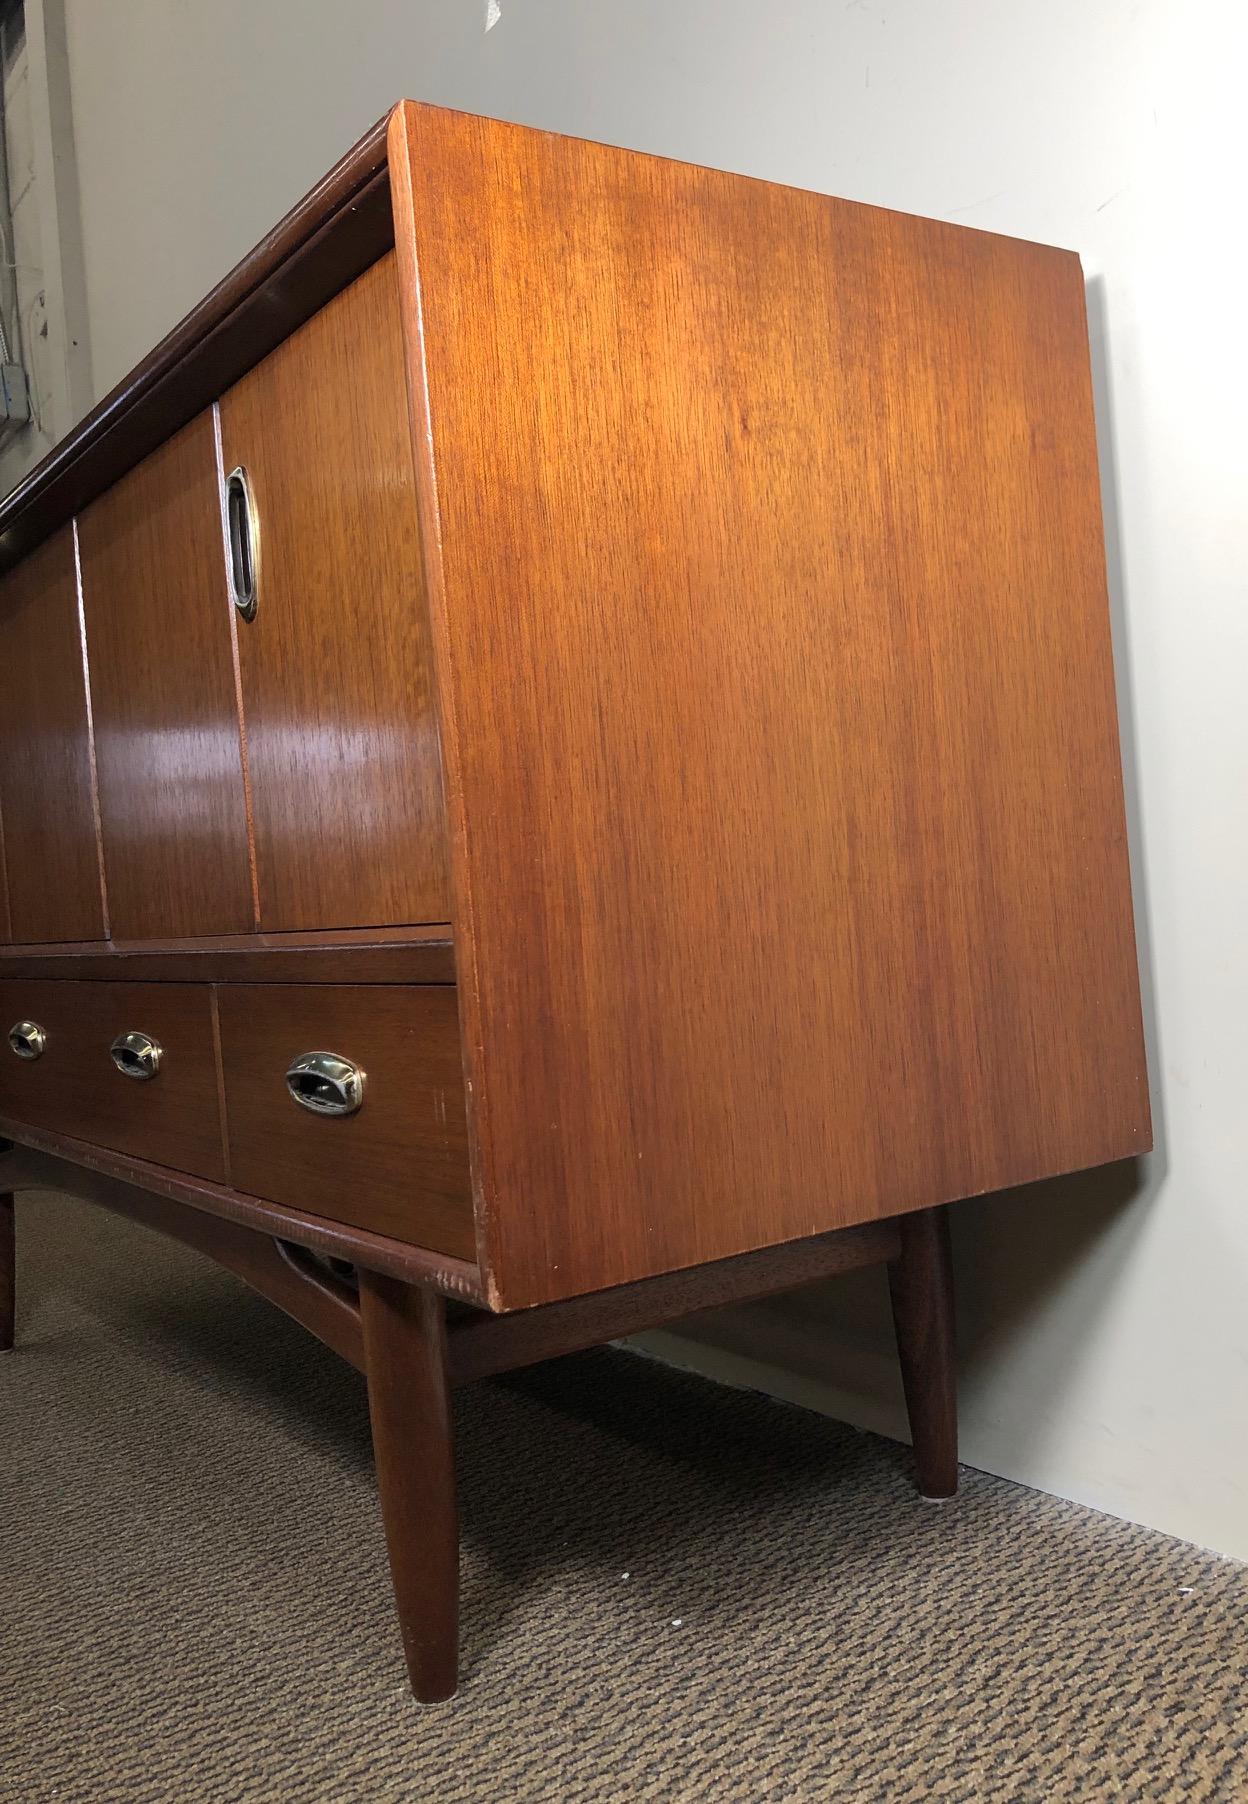 Midcentury Mahogany Credenza Sideboard with Metal Pulls by G Plan For Sale 7